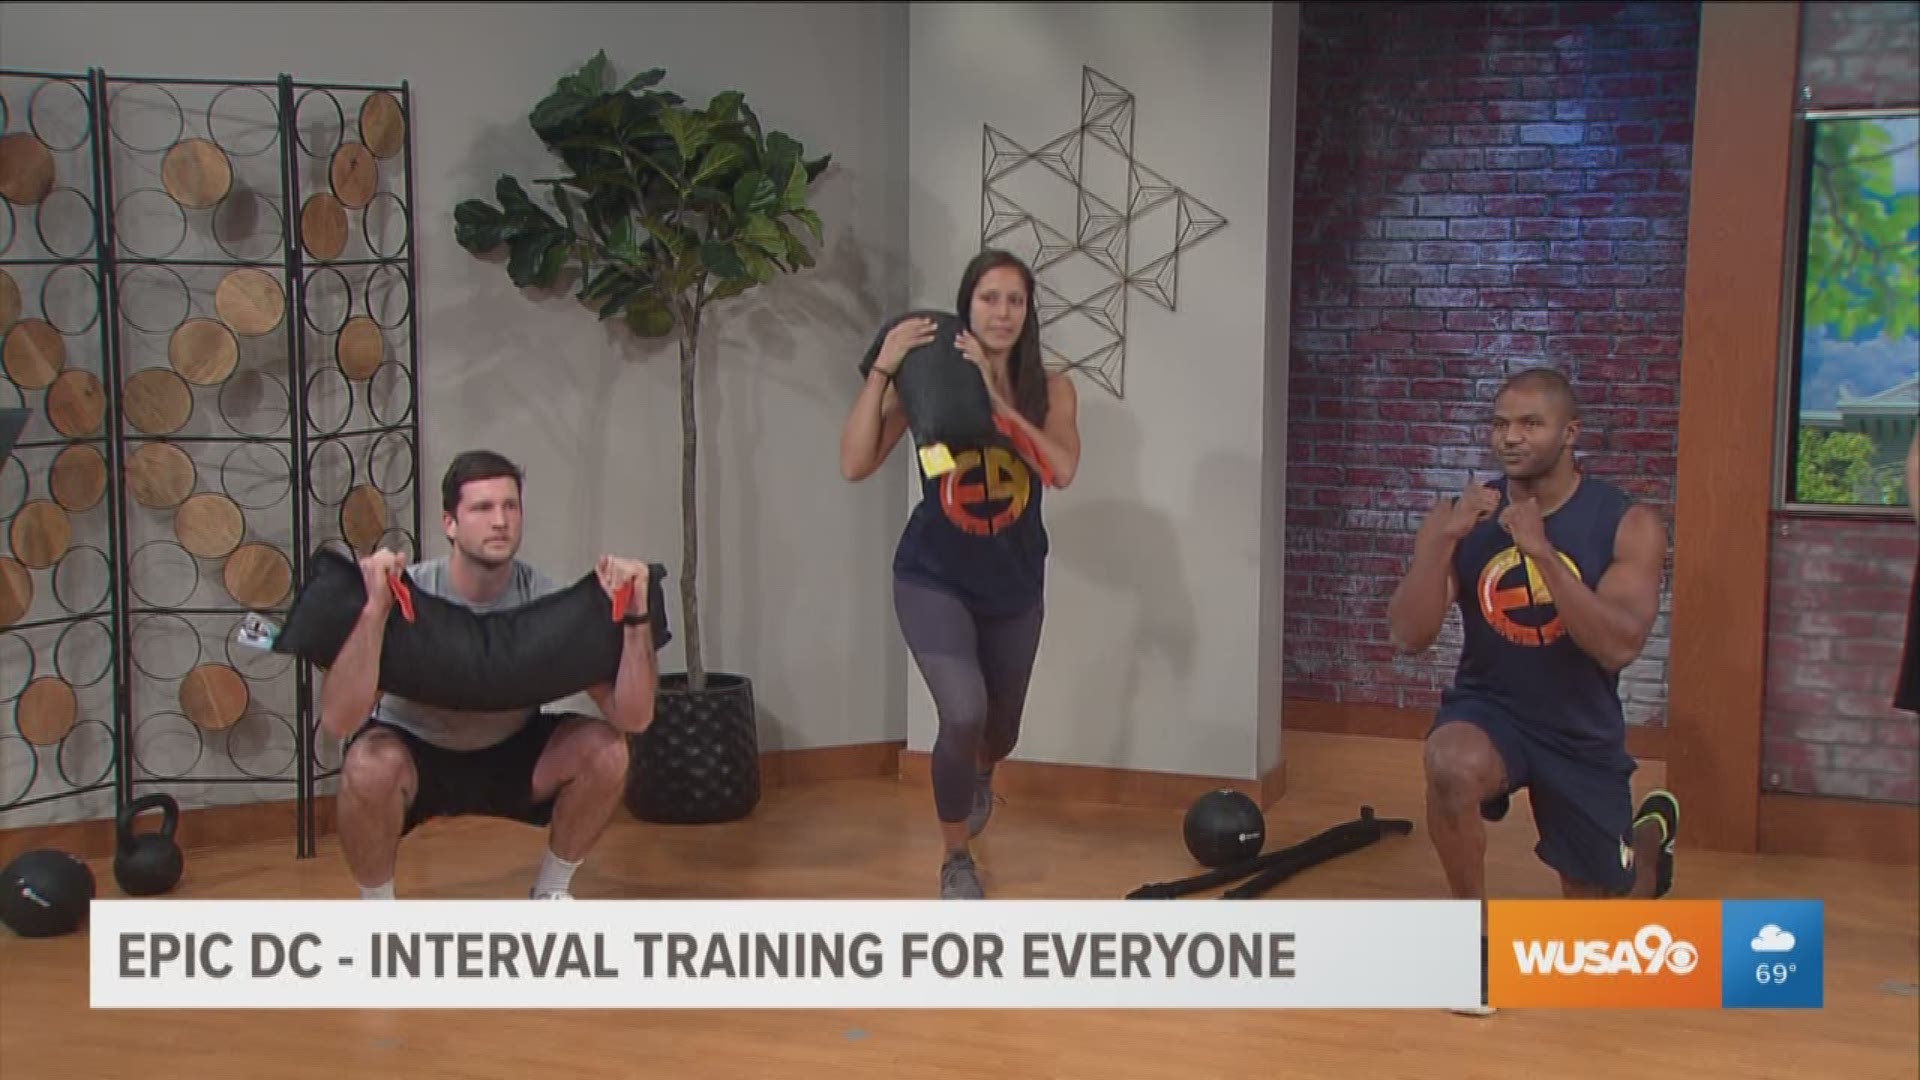 Brooke Greenwald and Coach Will Butler from Epic DC share how anyone can participate in the interval training at Epic DC.